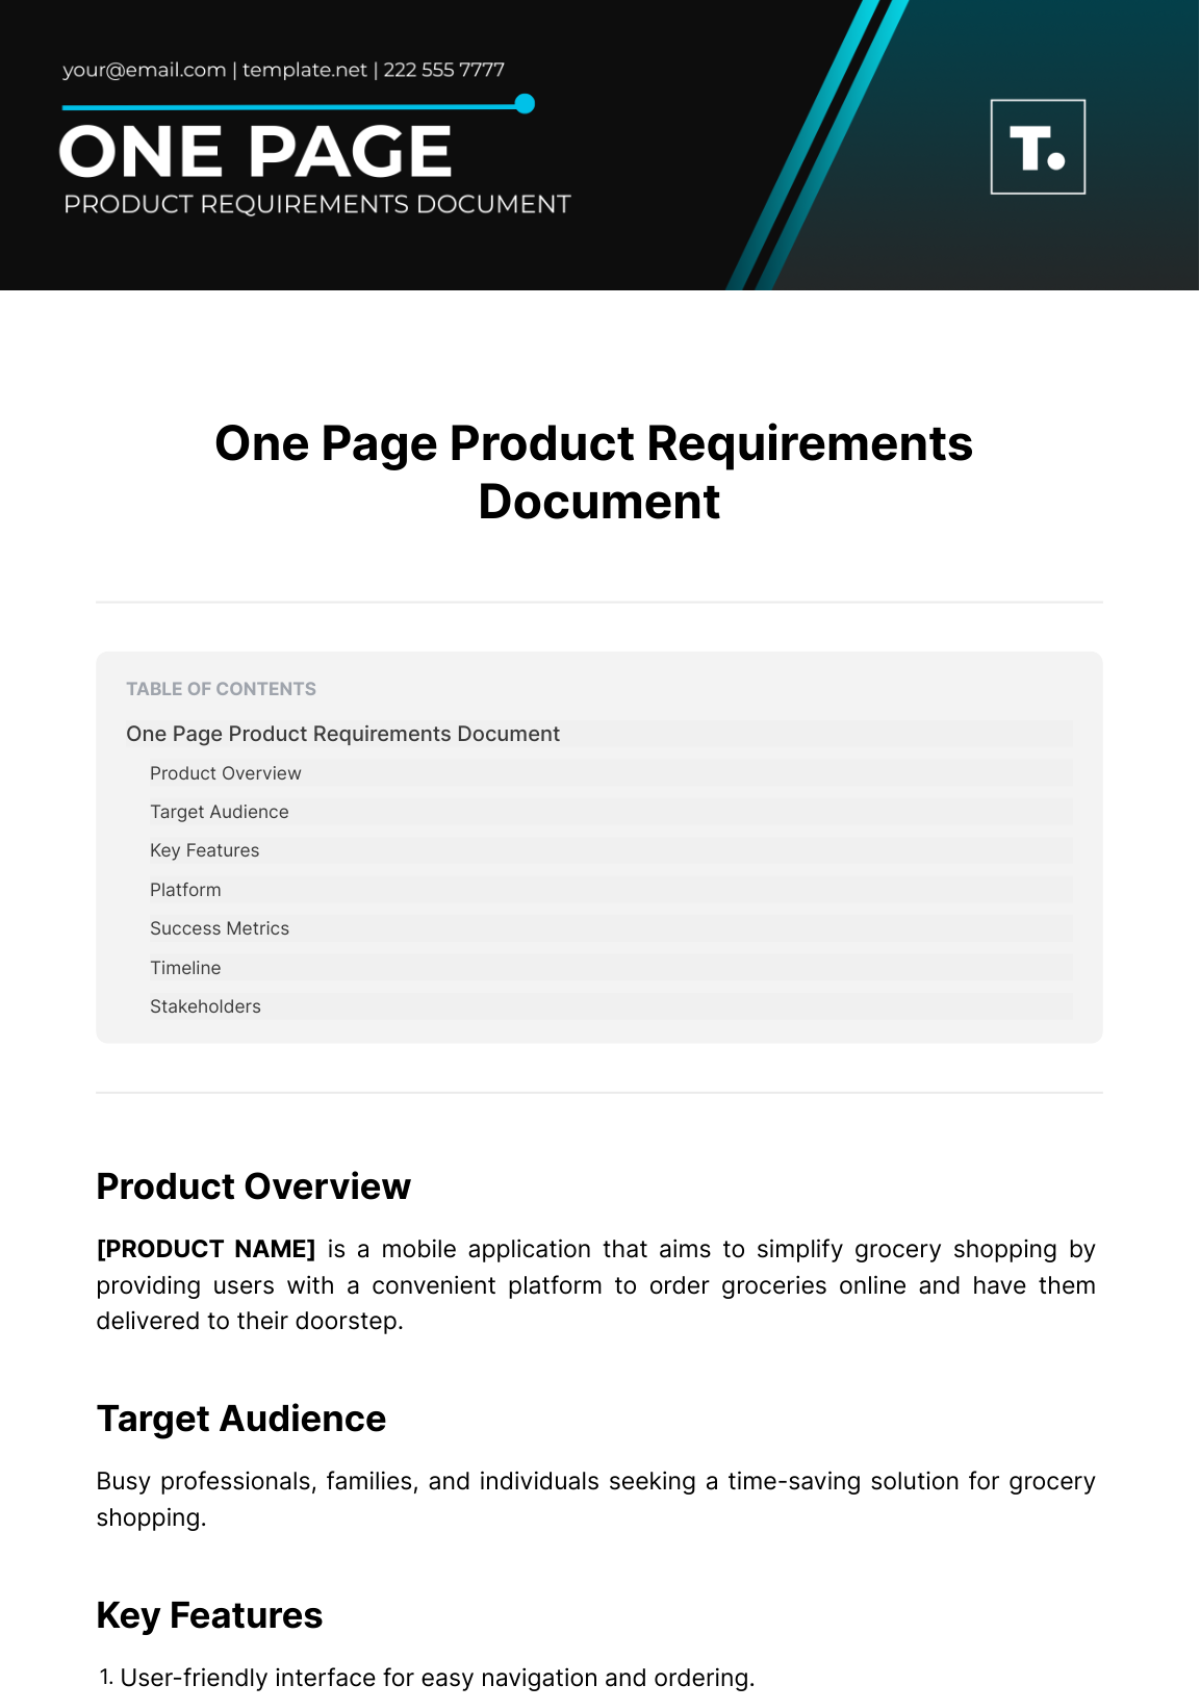 One Page Product Requirements Document Template